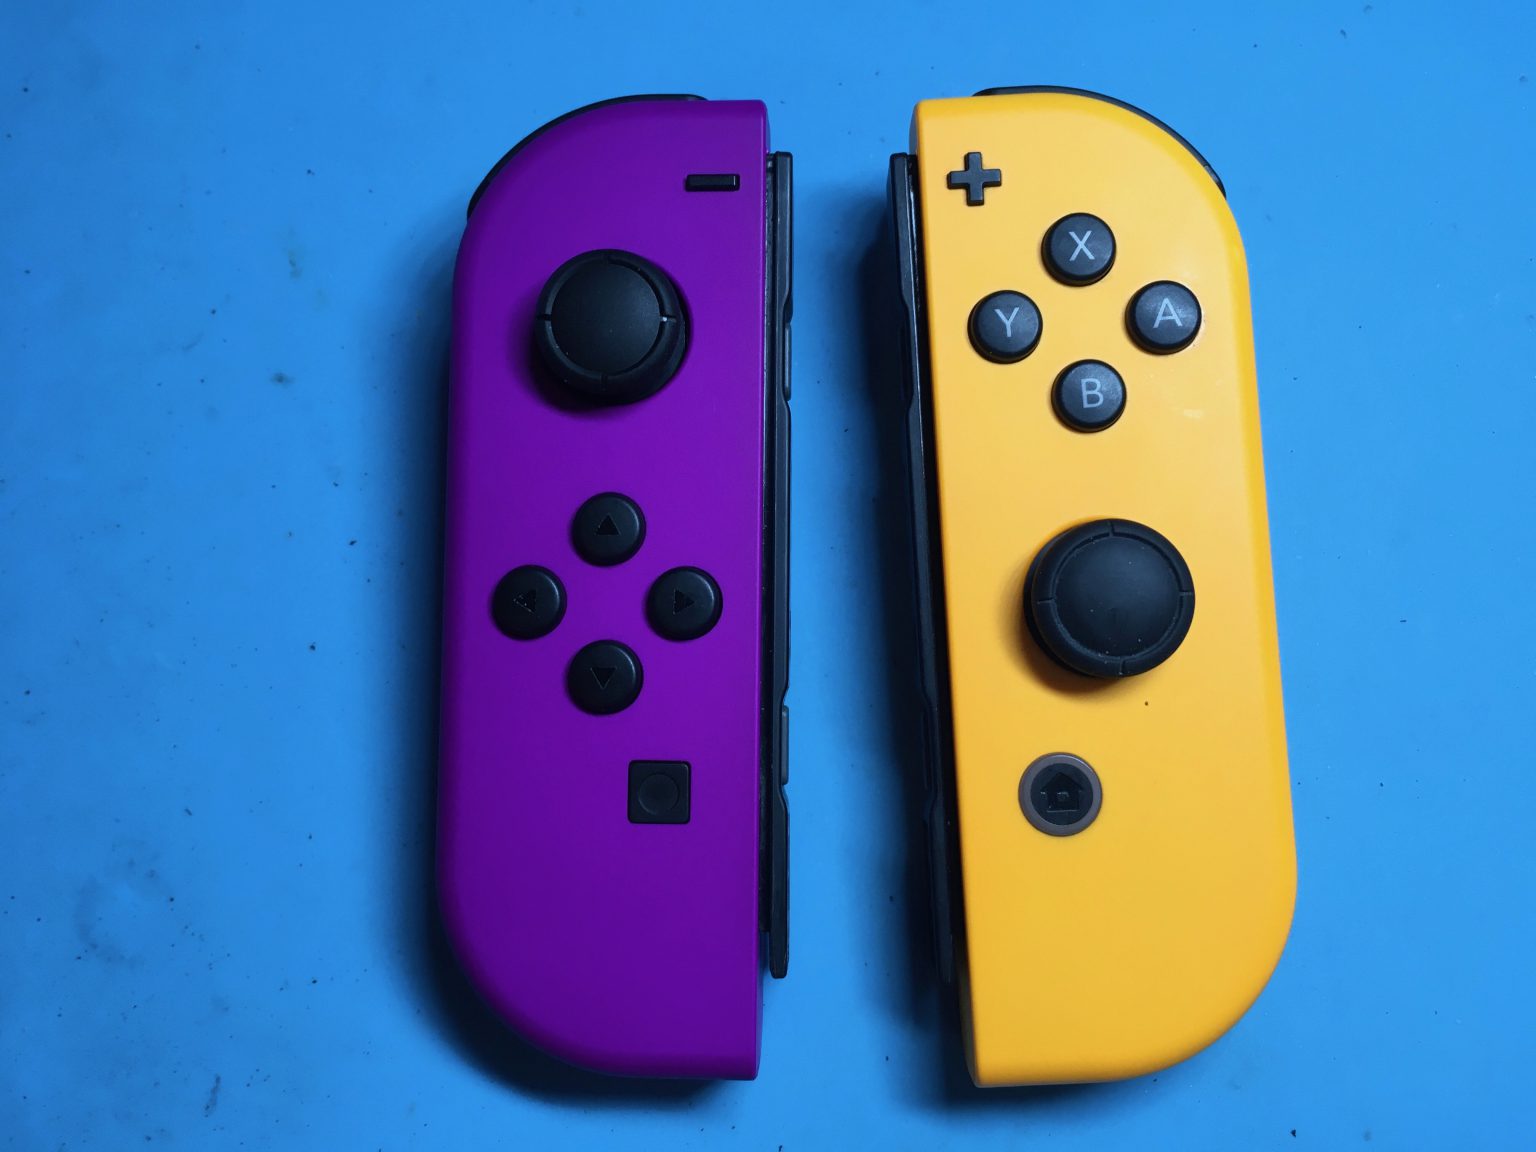 With the influx of custom joycon designs